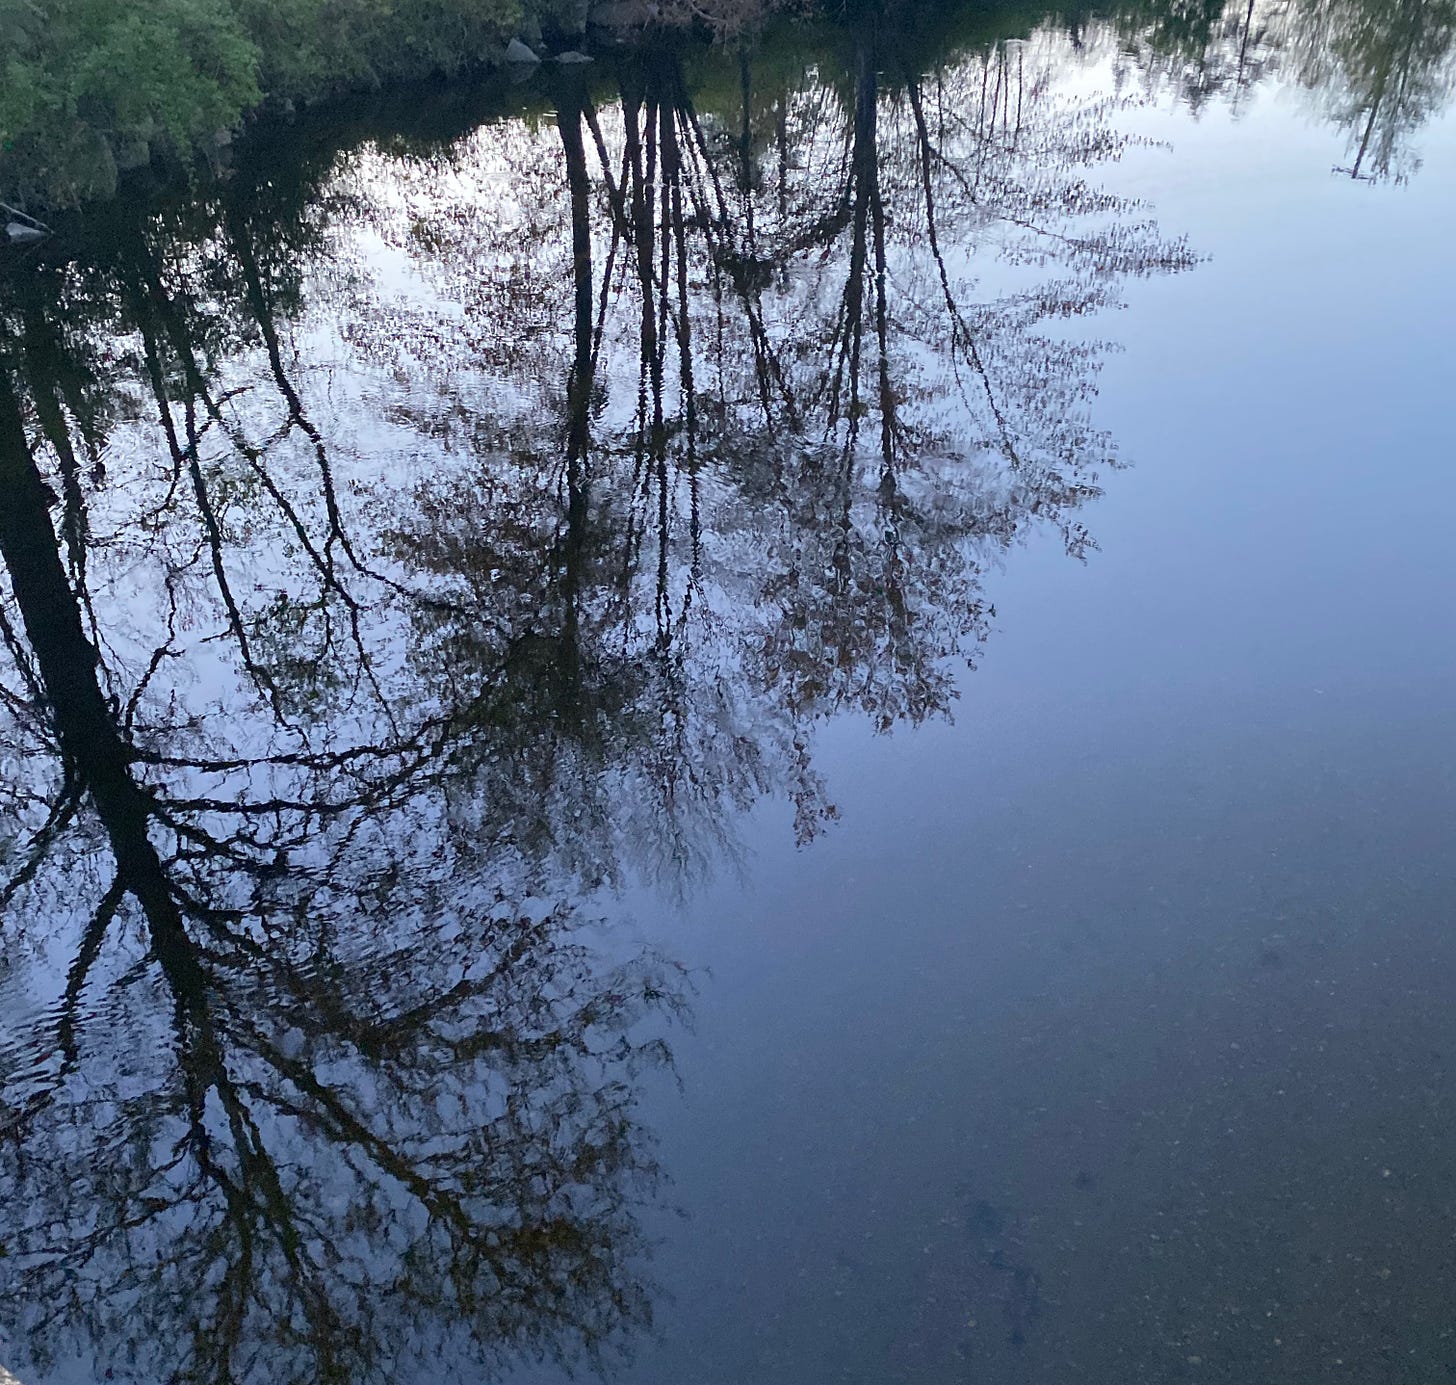 Dark reflections of several leafing-out trees in the still blue water of a river.